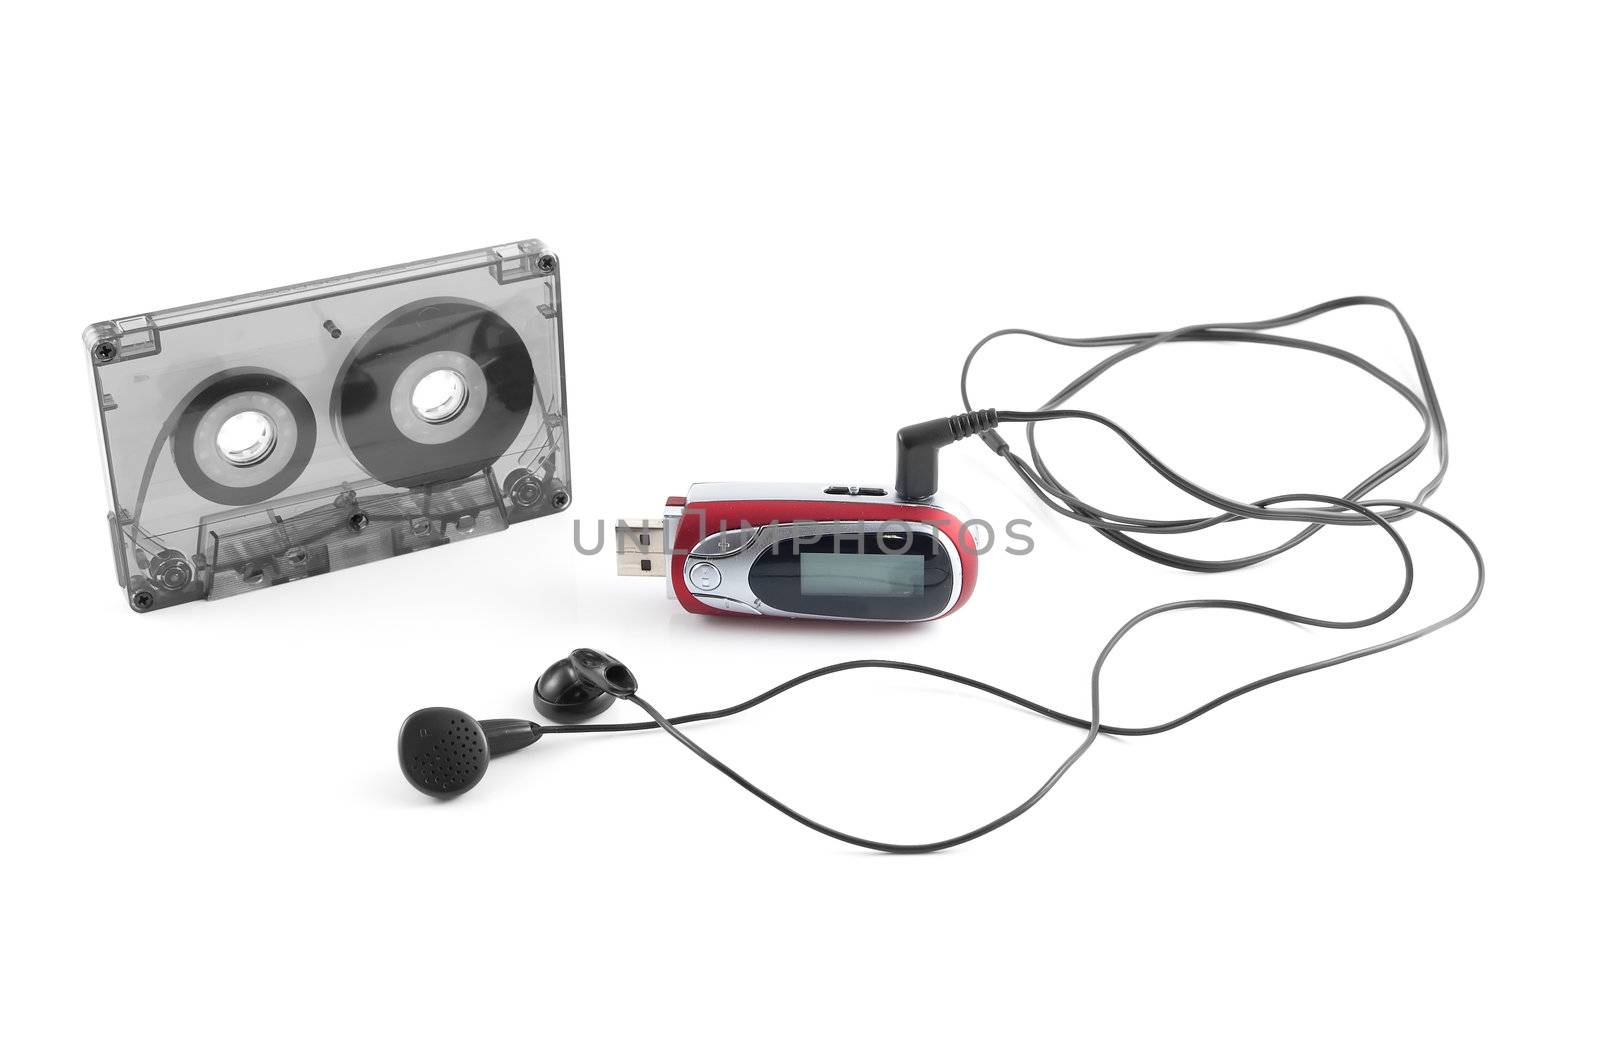 Audiocassette and mp3 player on a white background.
The concept of progress of audio.